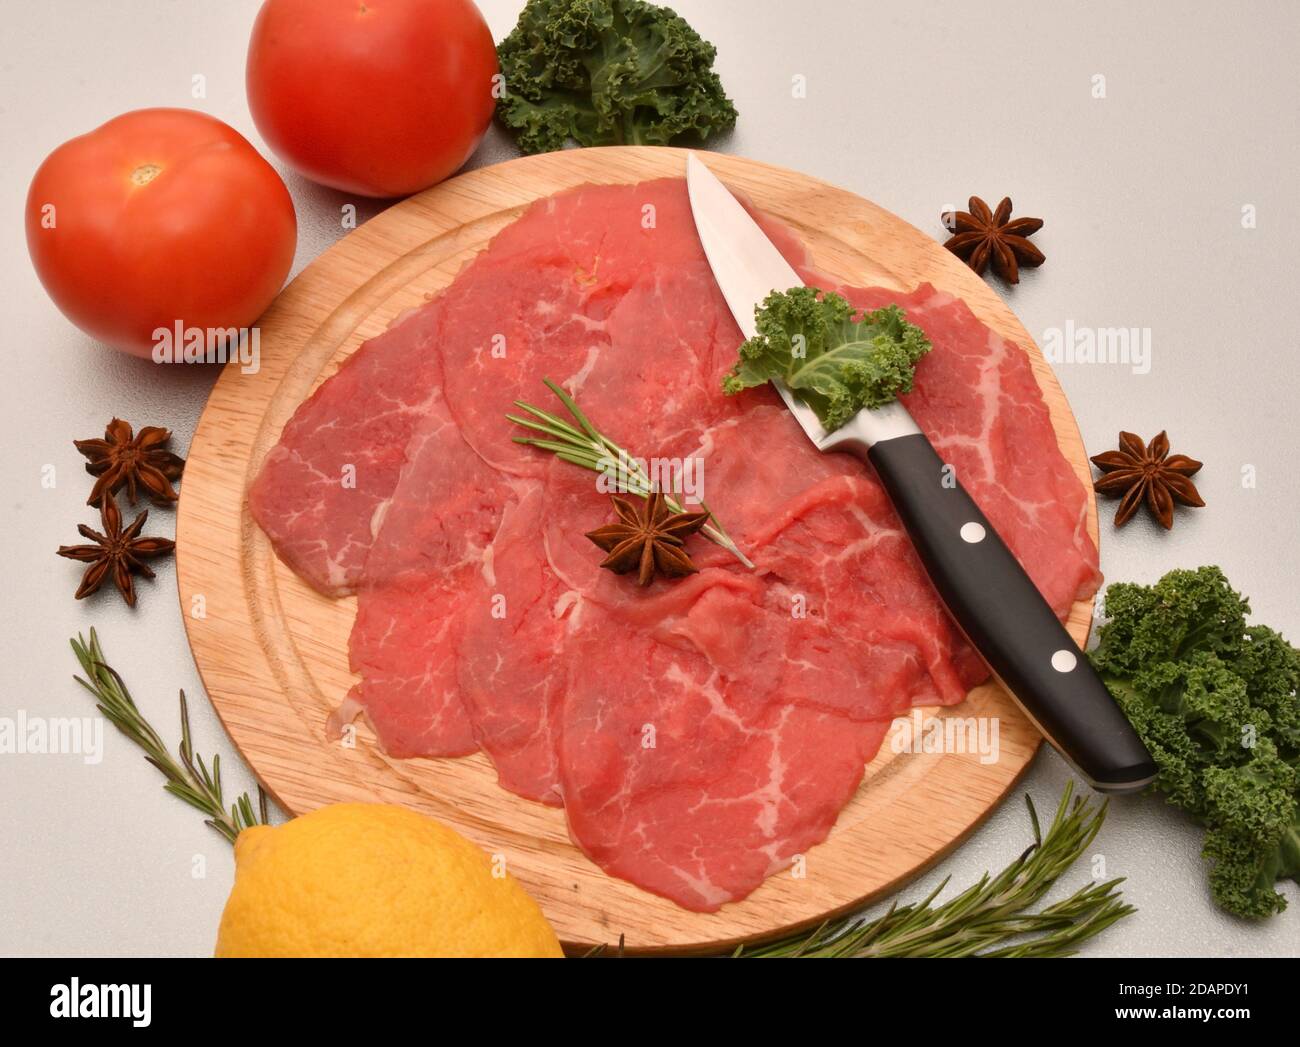 Carpaccio dish of thinly sliced pieces (slices) raw beef tenderloin Stock Photo